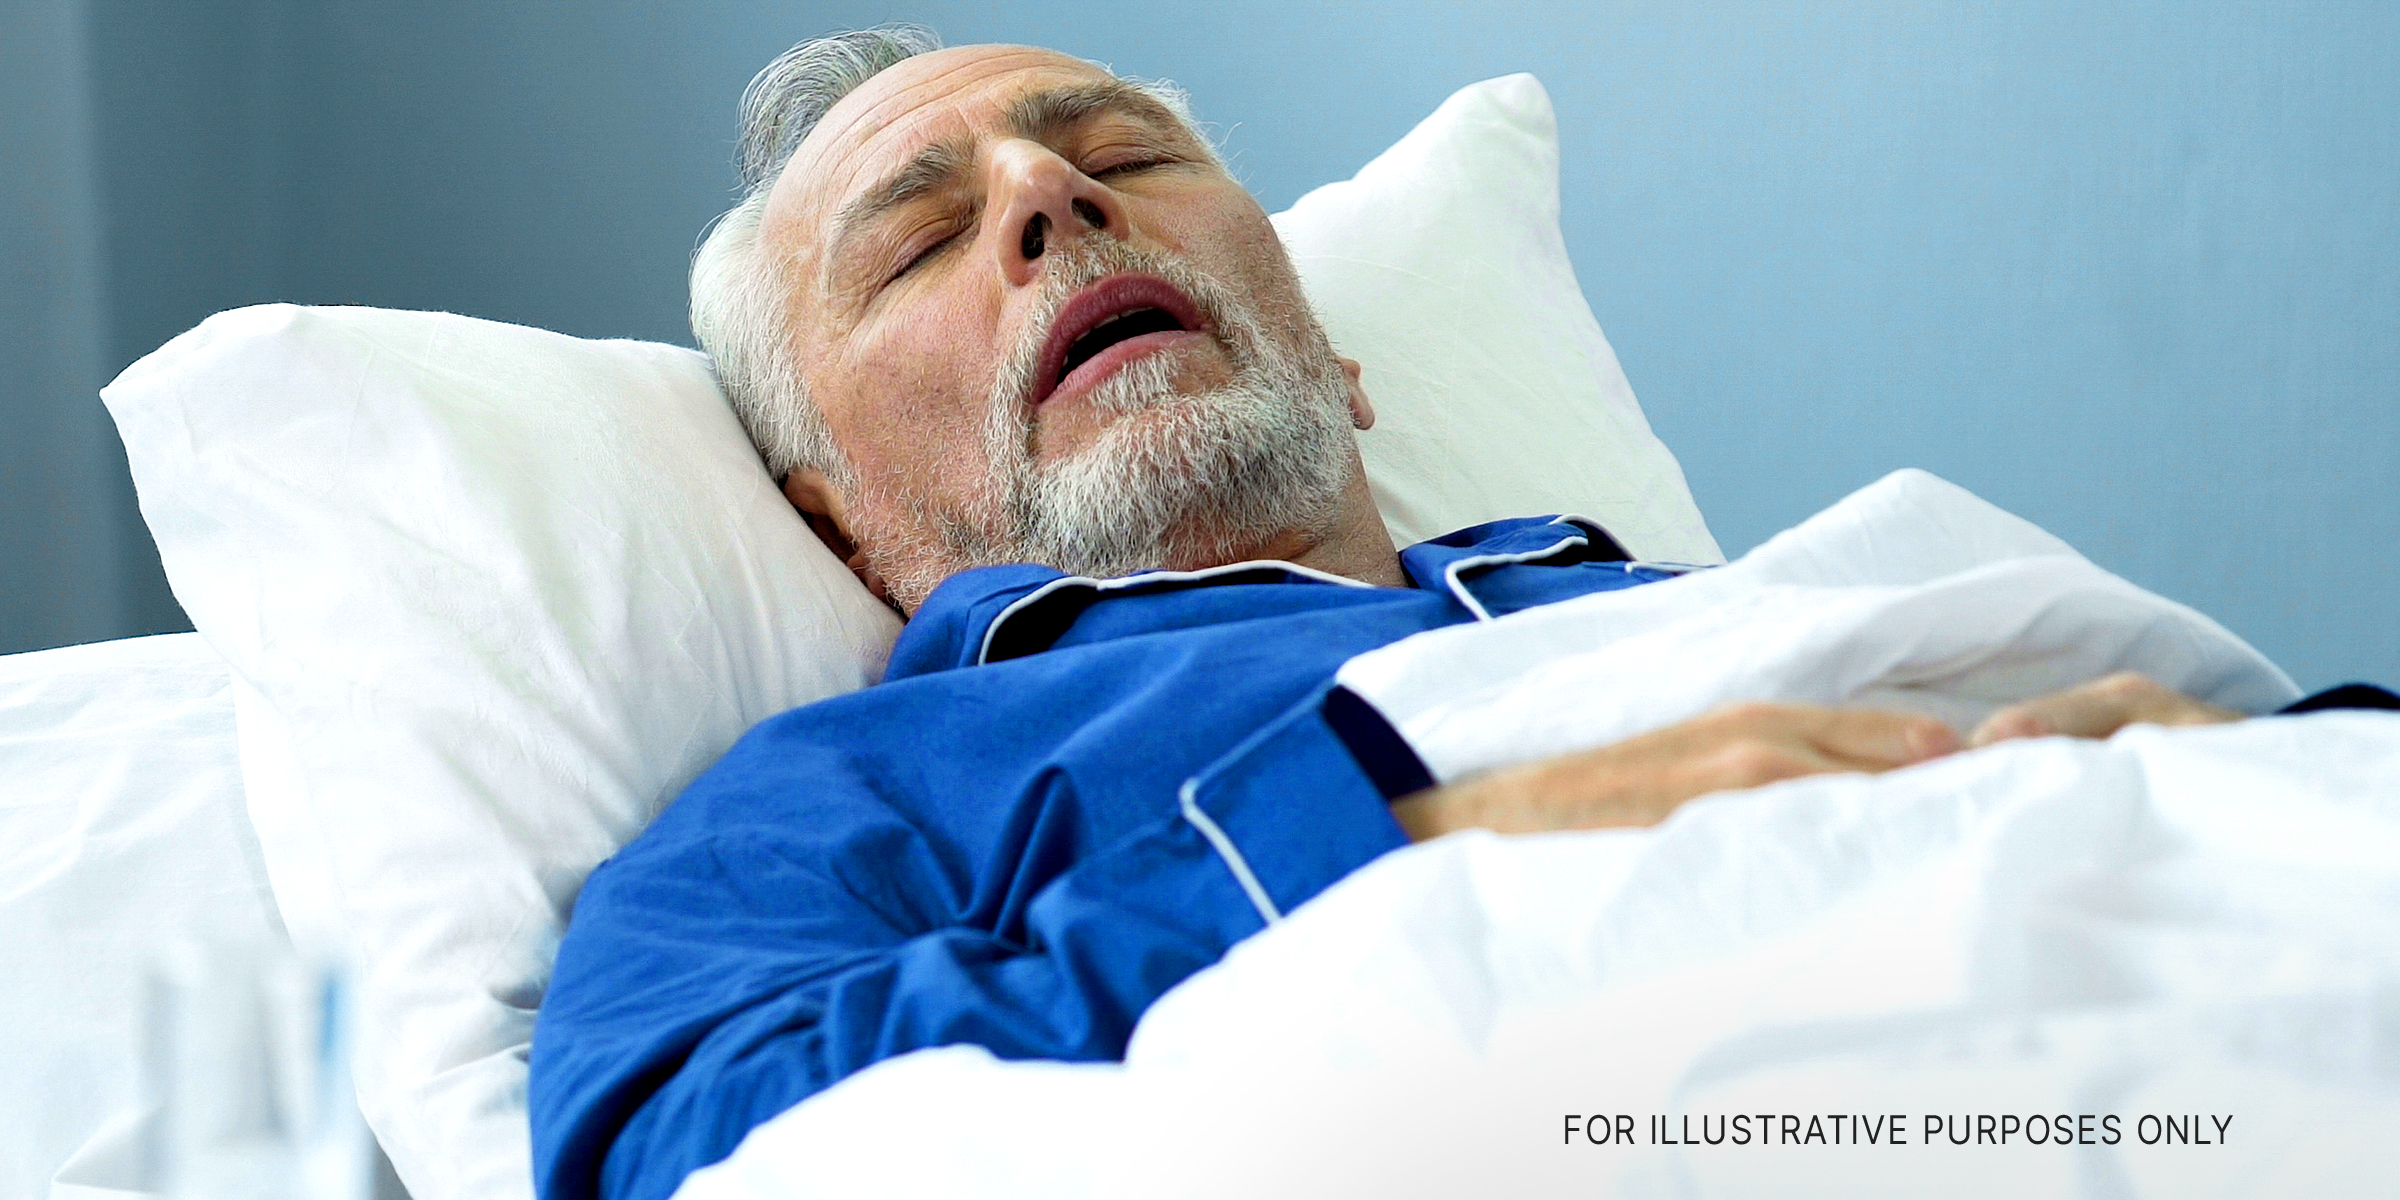 A man lying in bed with his eyes closed | Source: Shutterstock